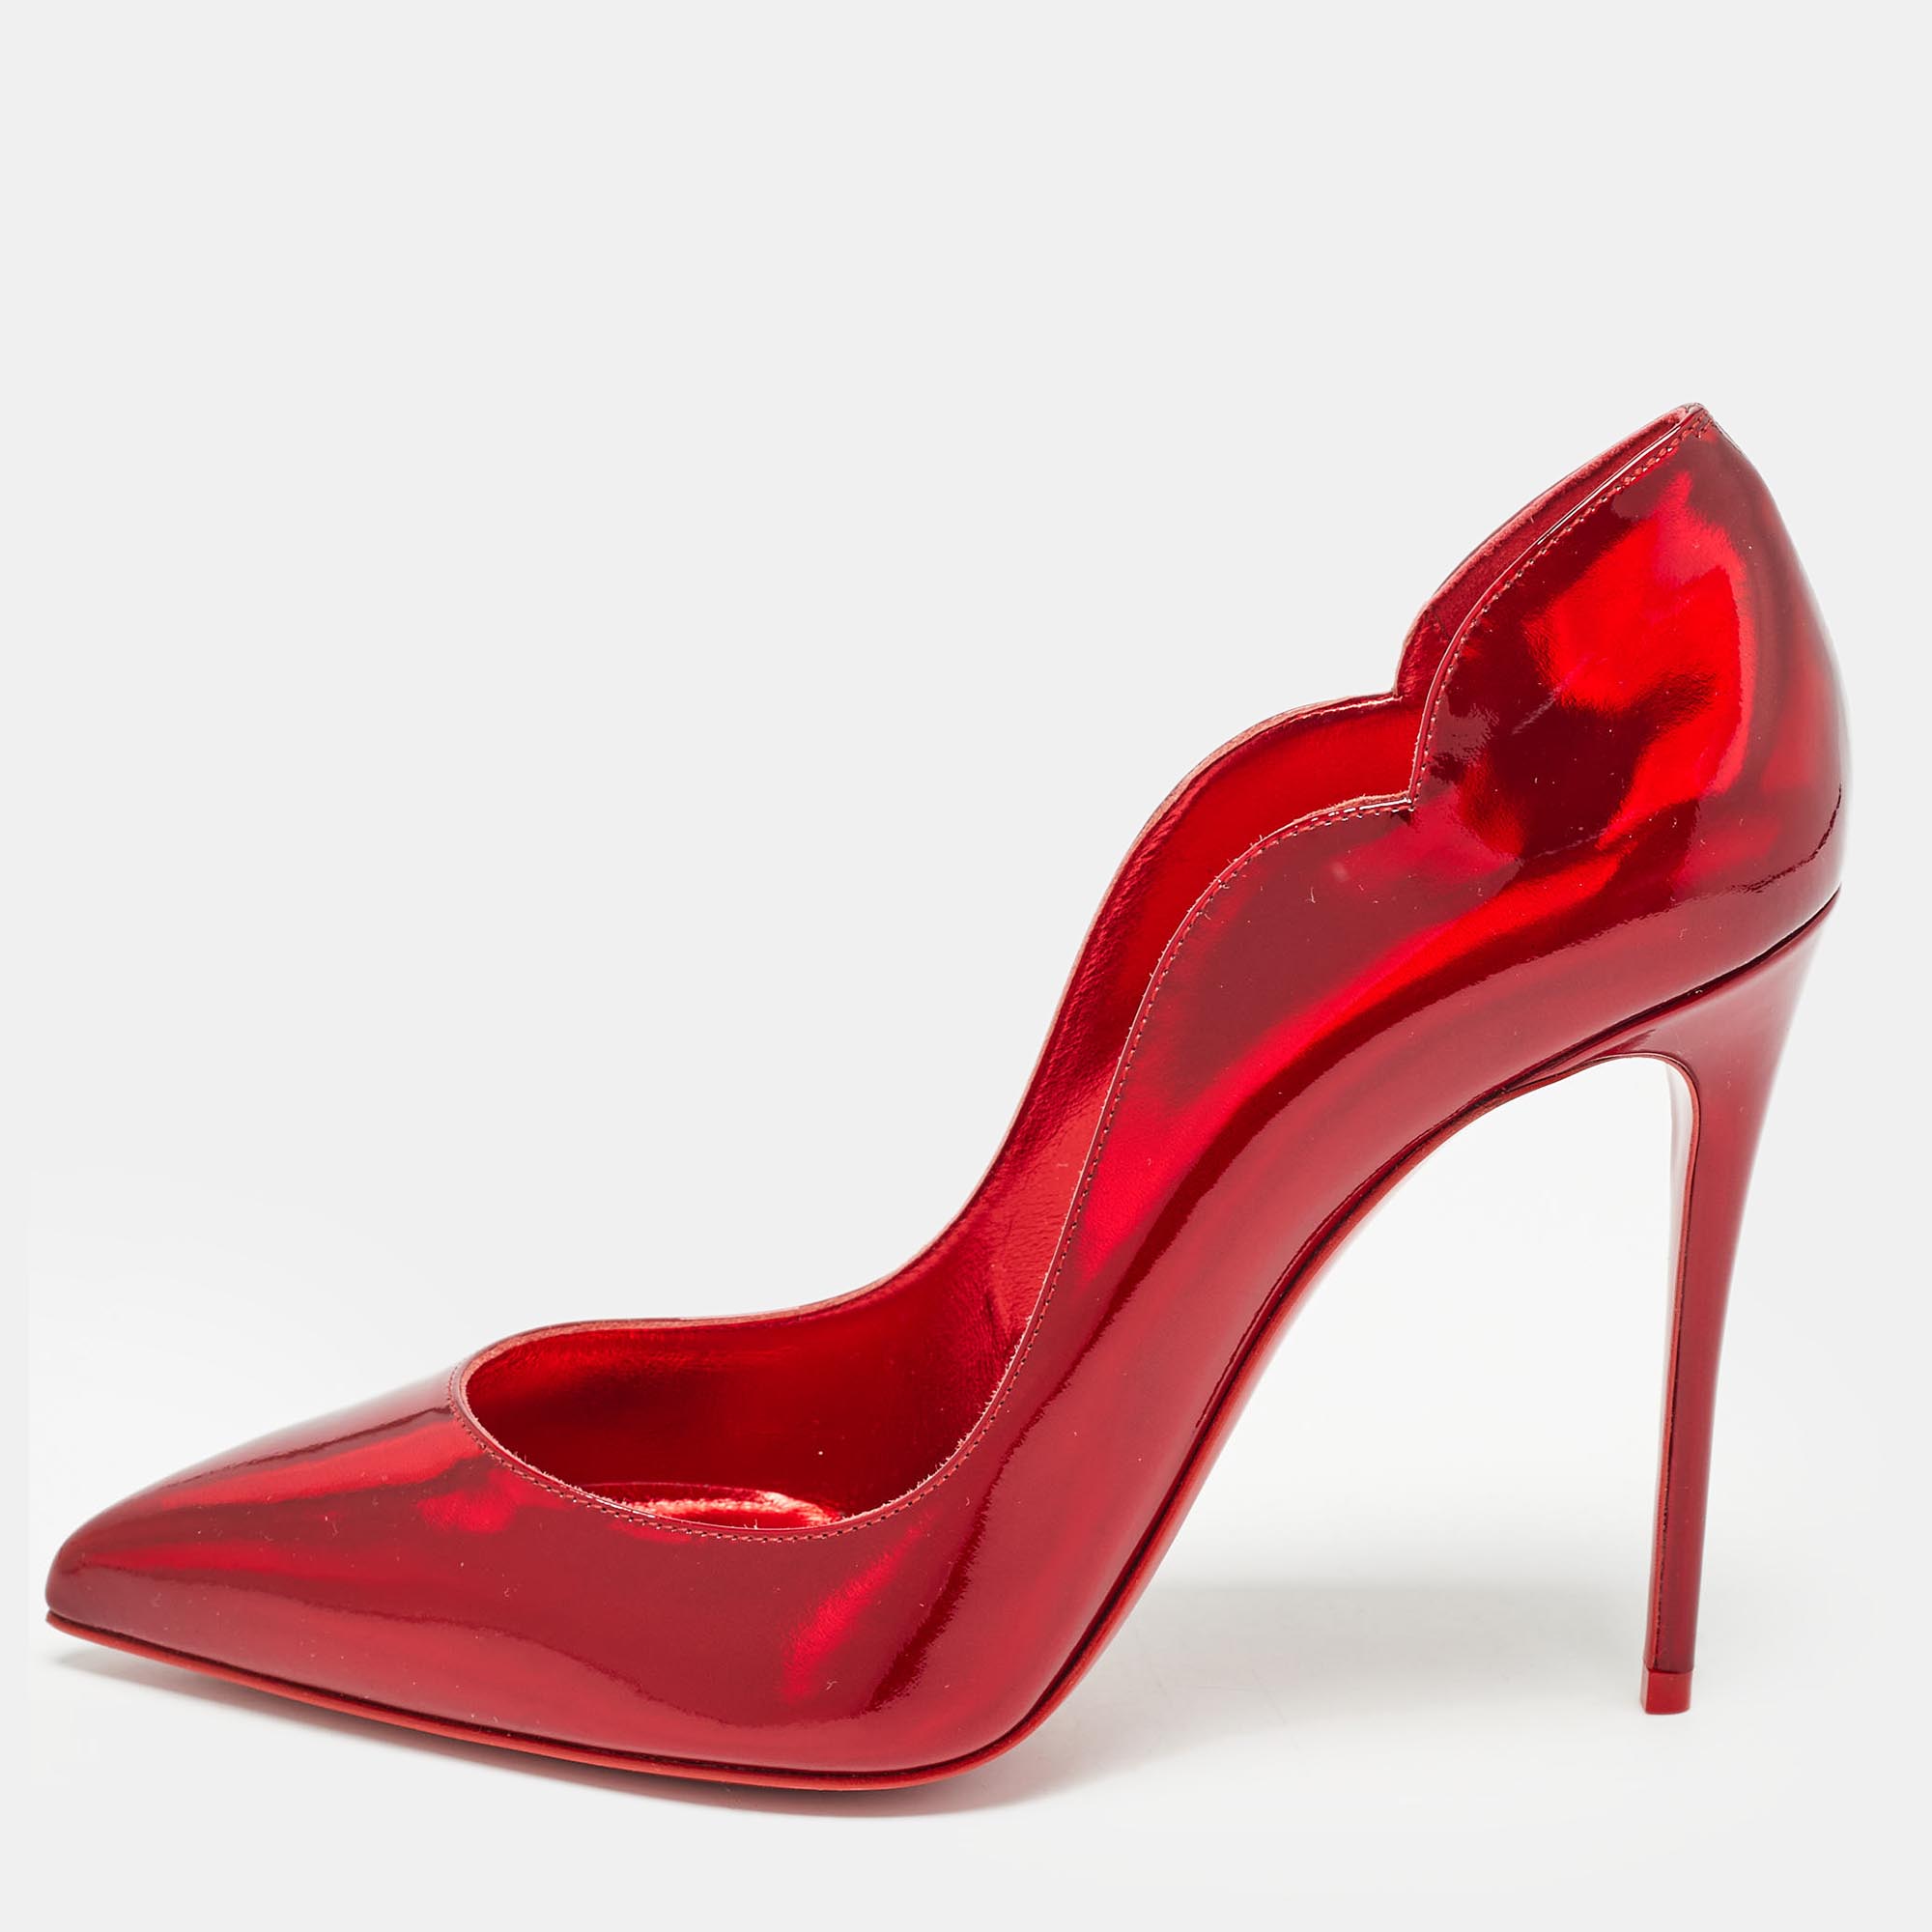 Christian louboutin red patent leather hot chick pumps size 38.5